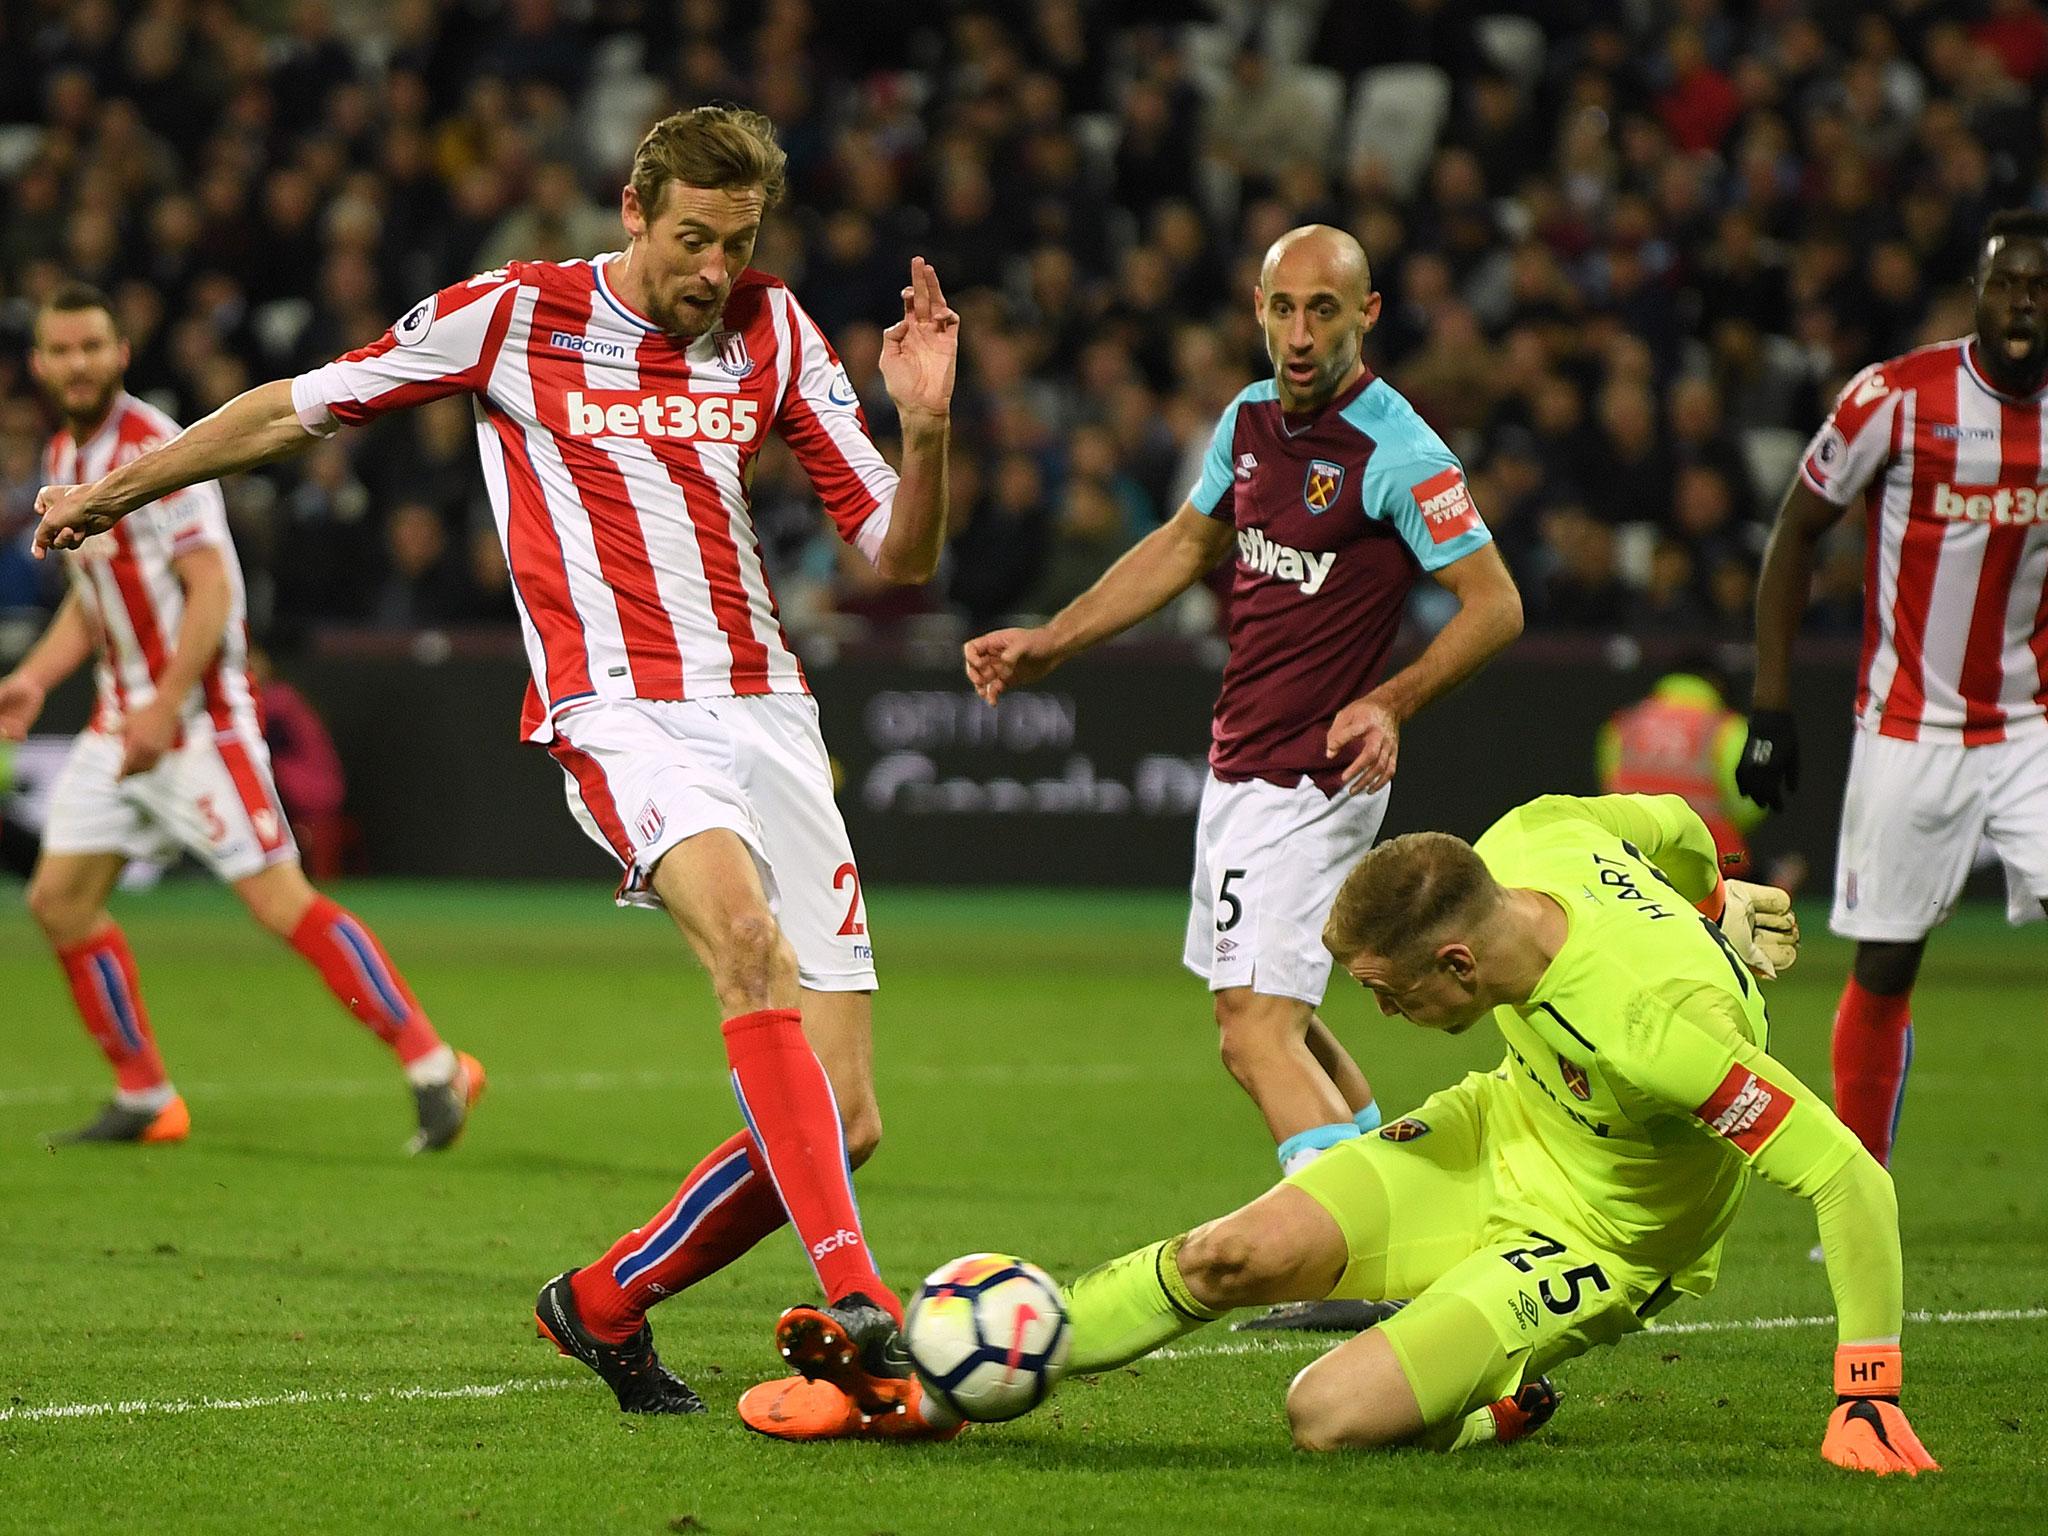 Peter Crouch gave Stoke hope of a win with his goal against West Ham